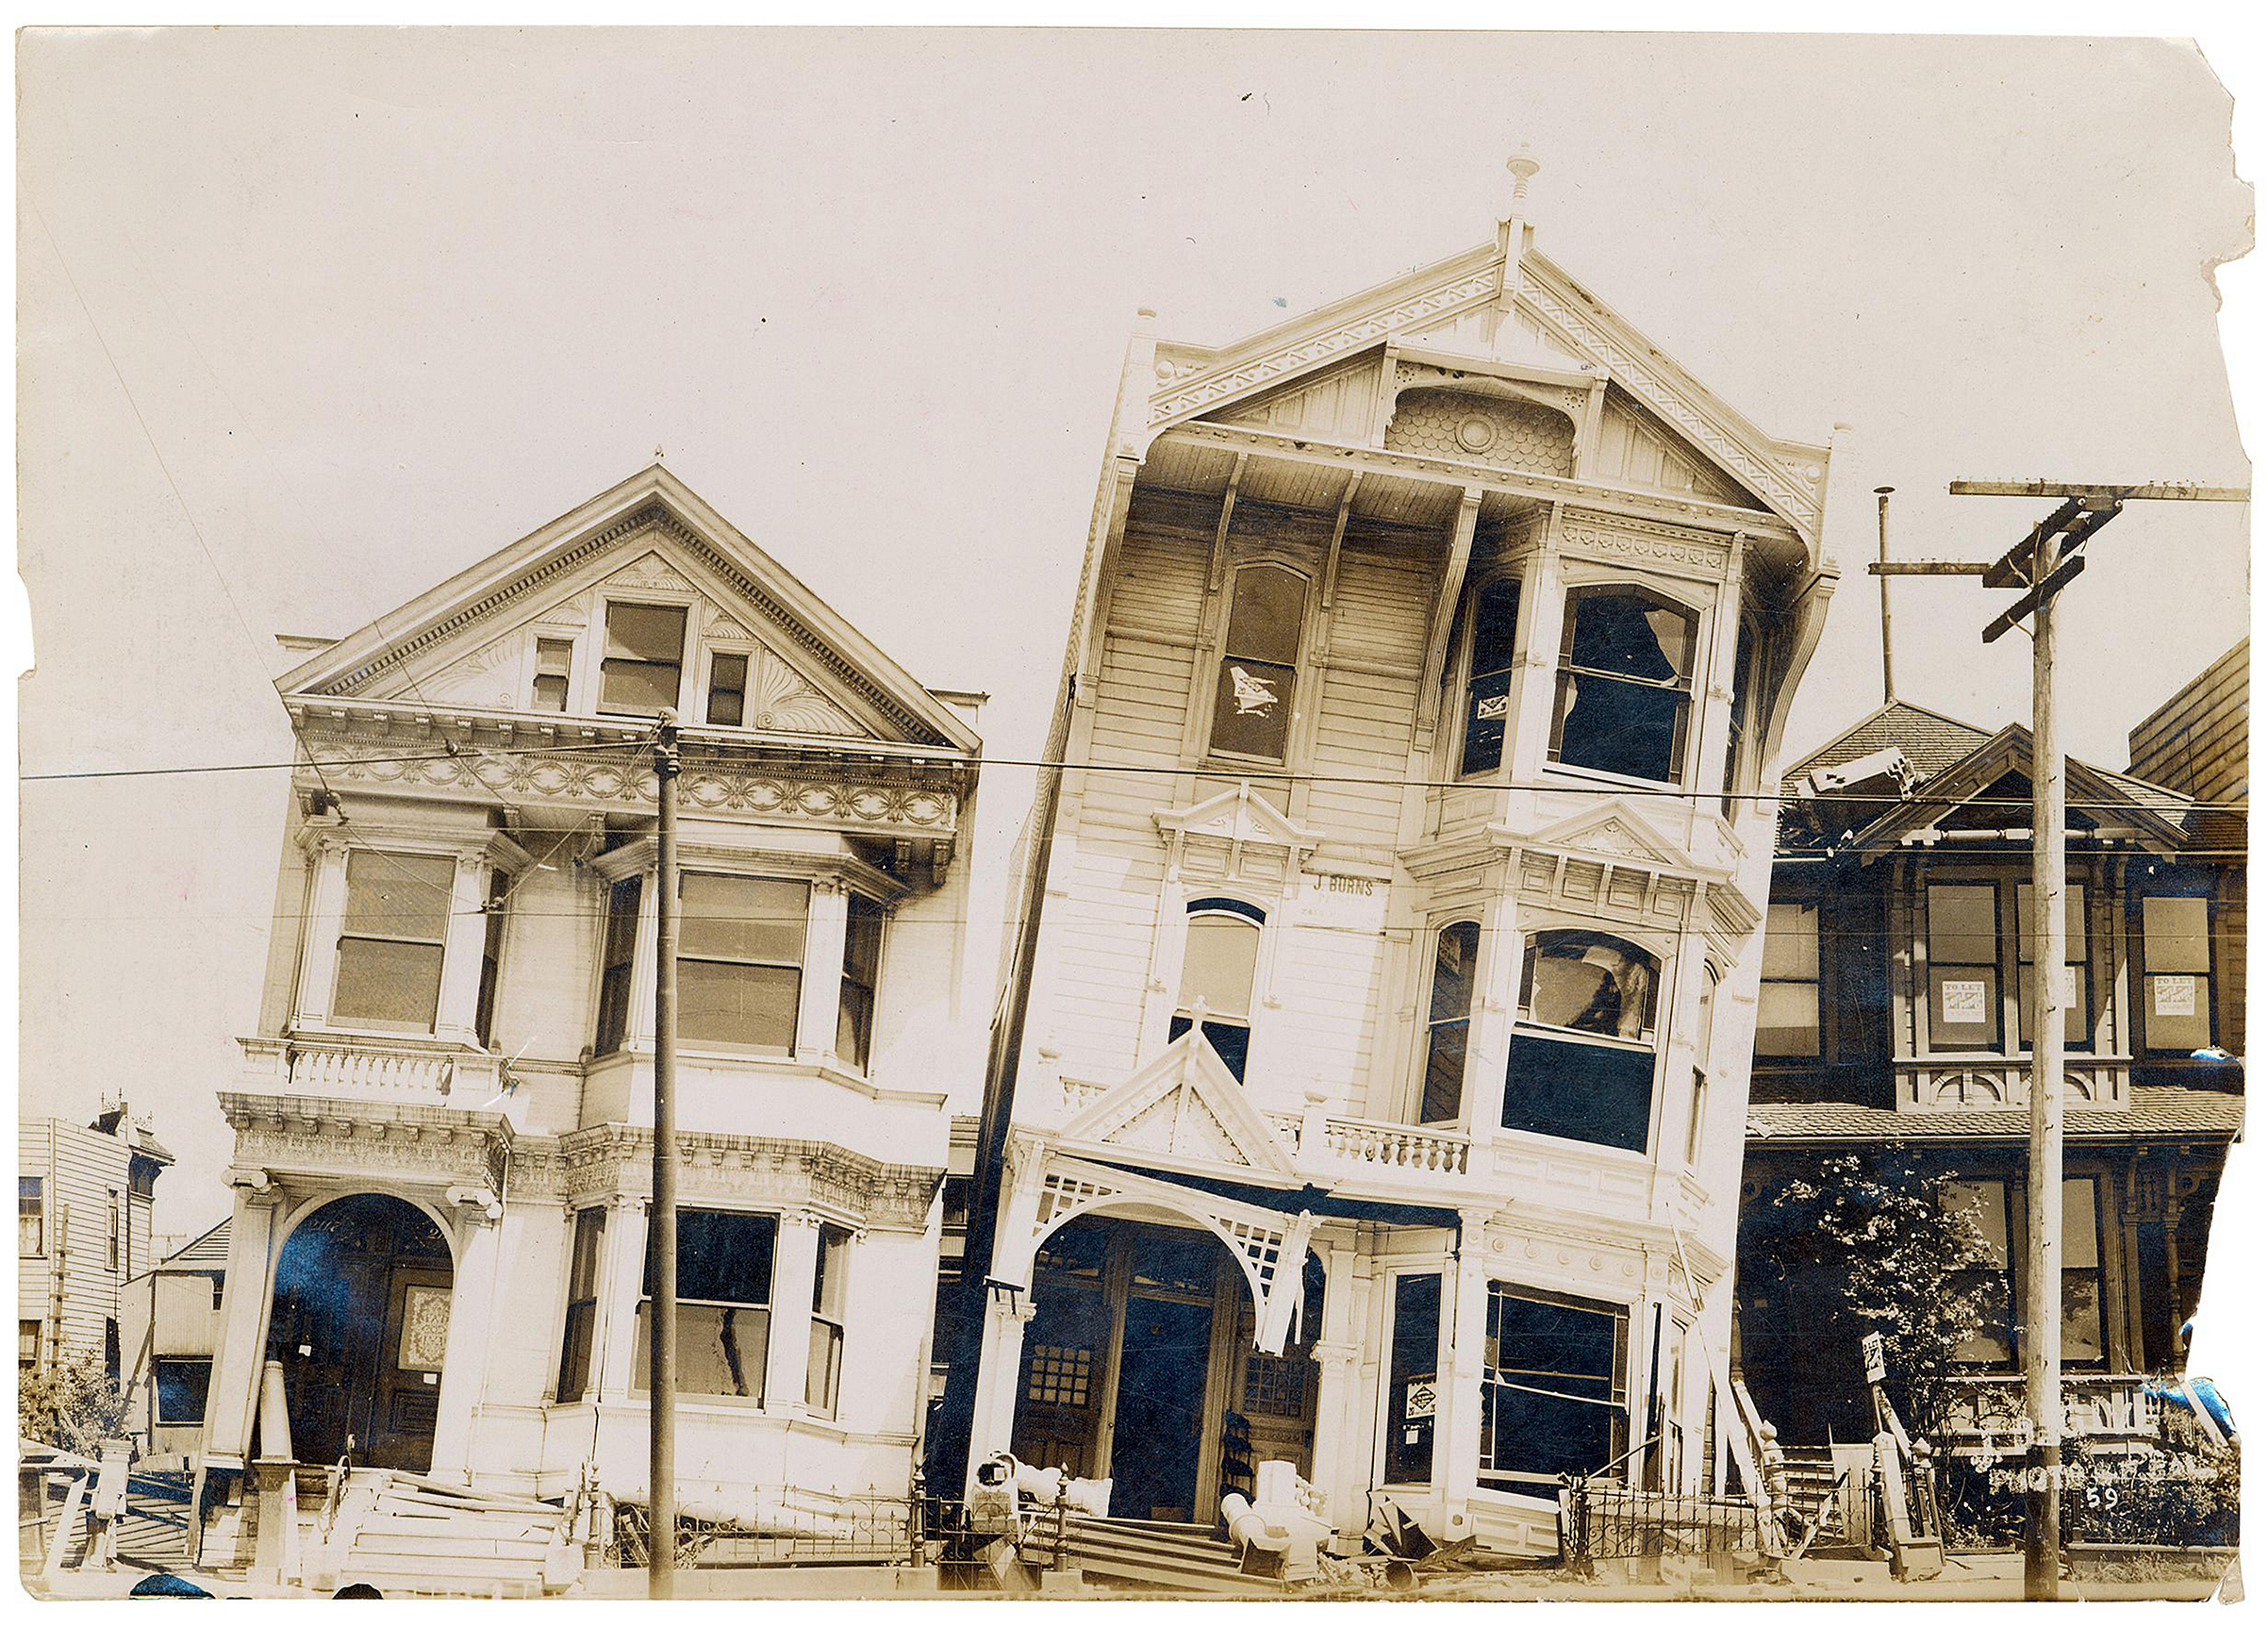 Houses in San Francisco, after an April 18, 1906, earthquake toppled them and killed thousands (Brettman/Getty Images)